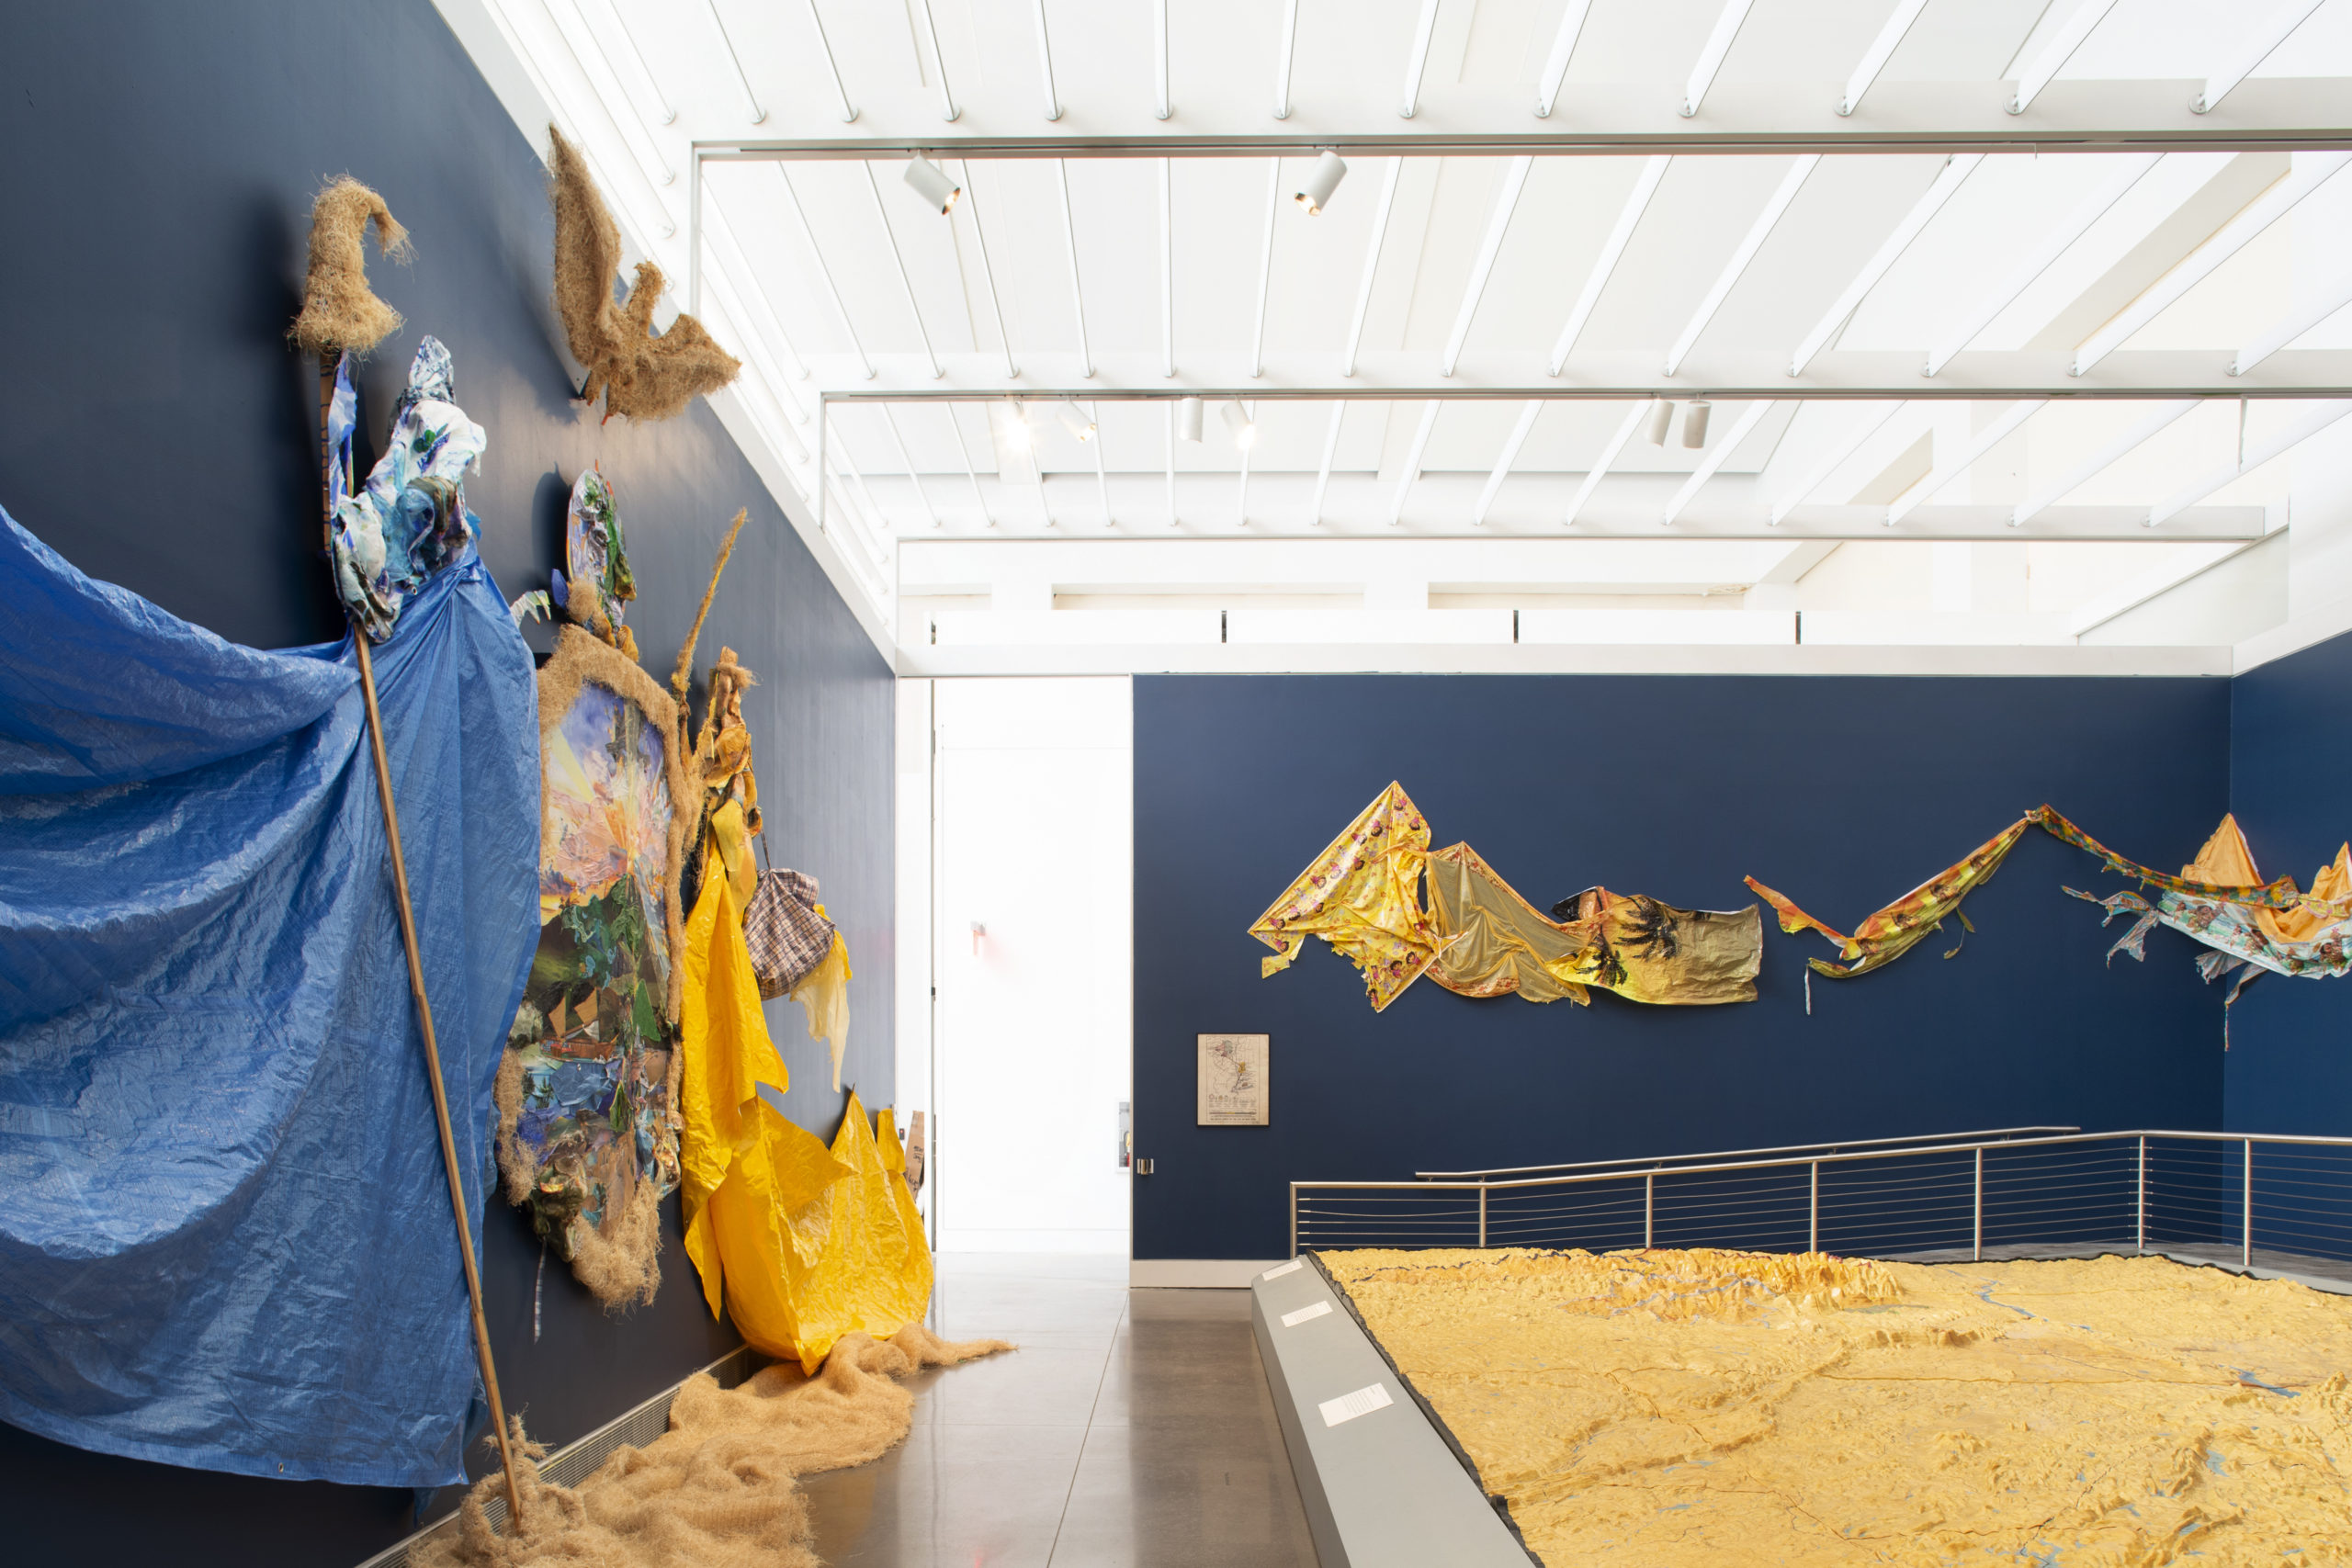 A exhibition space with a relief map of New York City’s water system installed on the floor. Surrounding the relief map is navy blue walls with a mixed-media collage and painting installation. The installation has an organic shape and is made of mostly blue, brown and yellow tones.